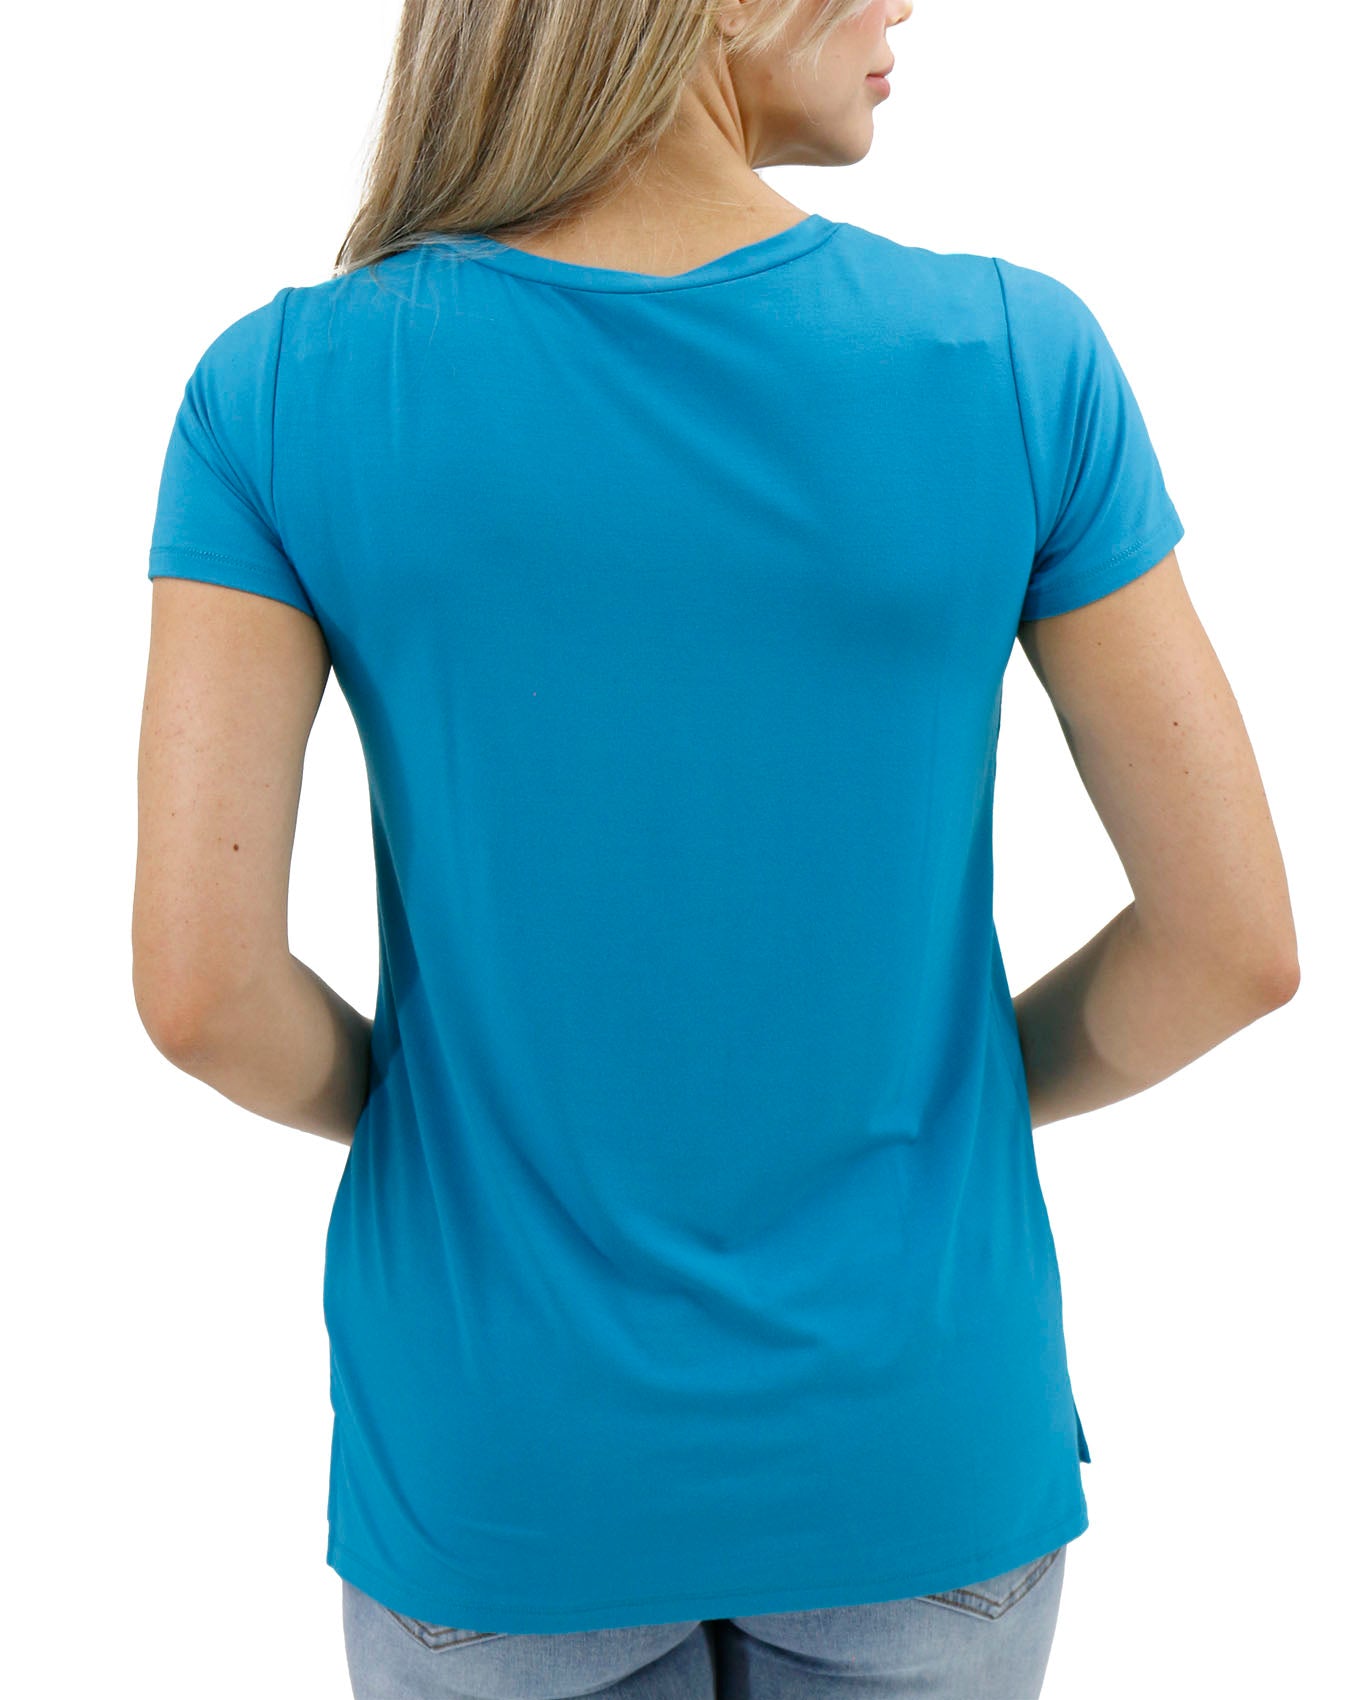 Back stock shot of Teal True Fit Perfect Pocket Tee